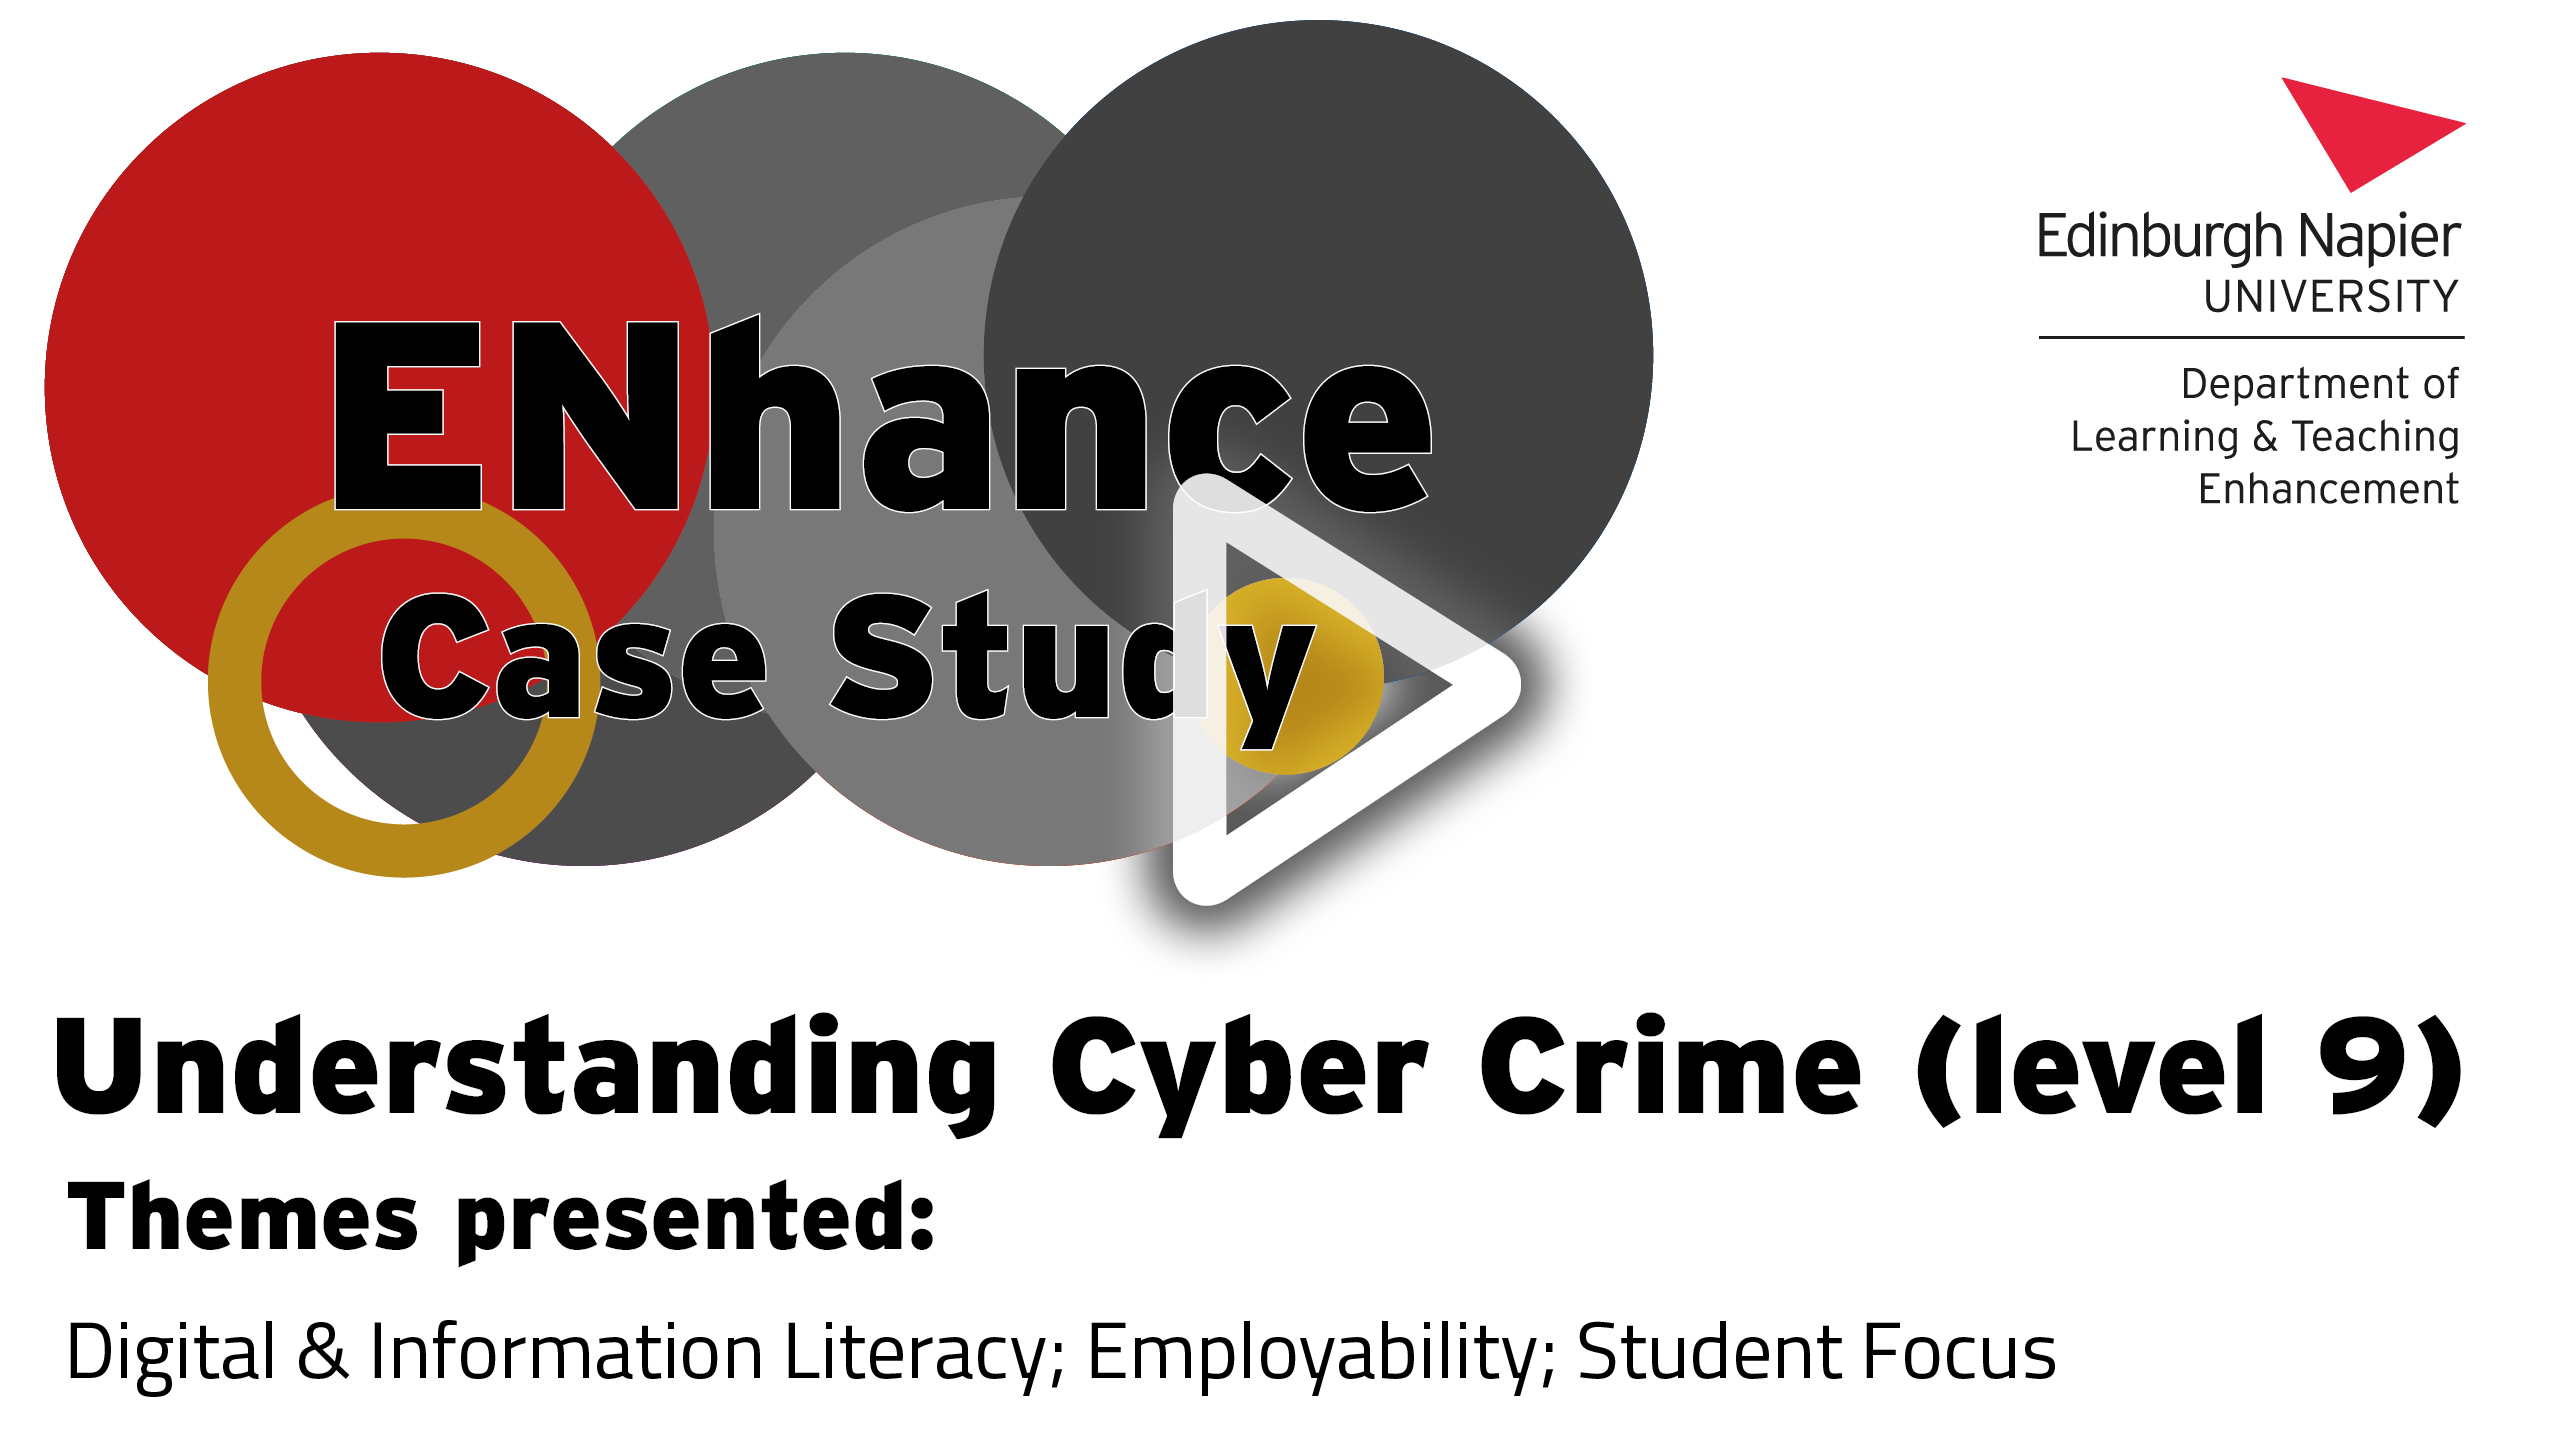 ENhance Case Study. Understanding Cyber Crime (level 9). Themes presented: Digital & Information Literacy; Employability; Student Focus. There is a play button as this is a link to the page where this video is.